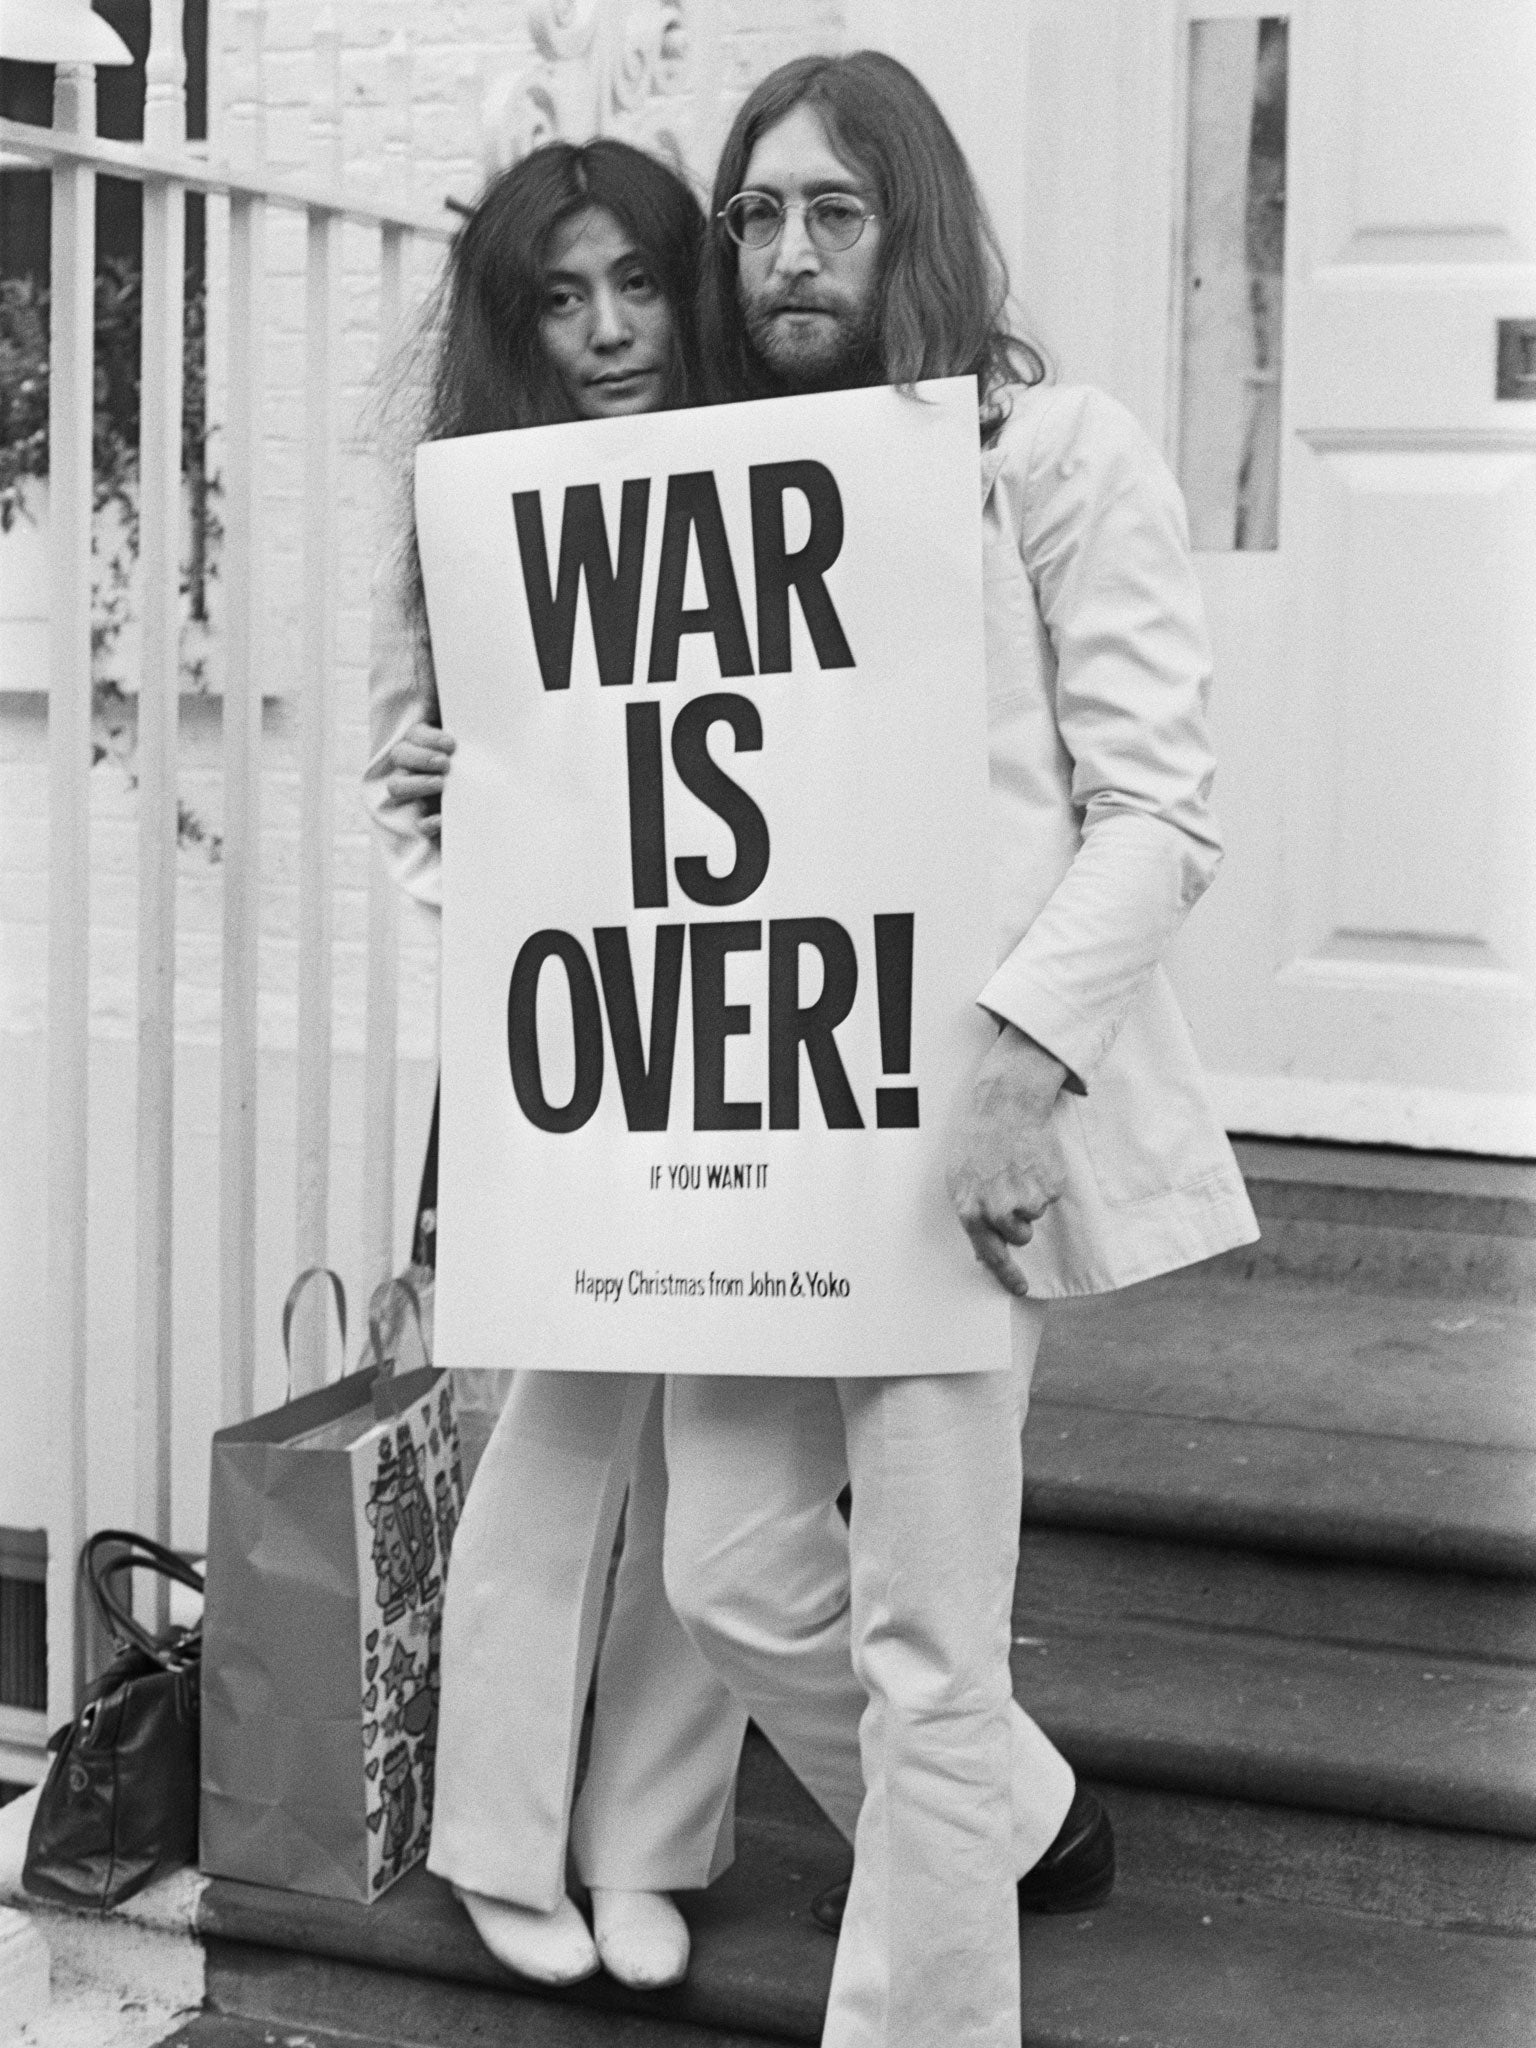 Happy Xmas (War Is Over): "An unbeatable combination of sanctimonious, whiny, mawkish and trite,"